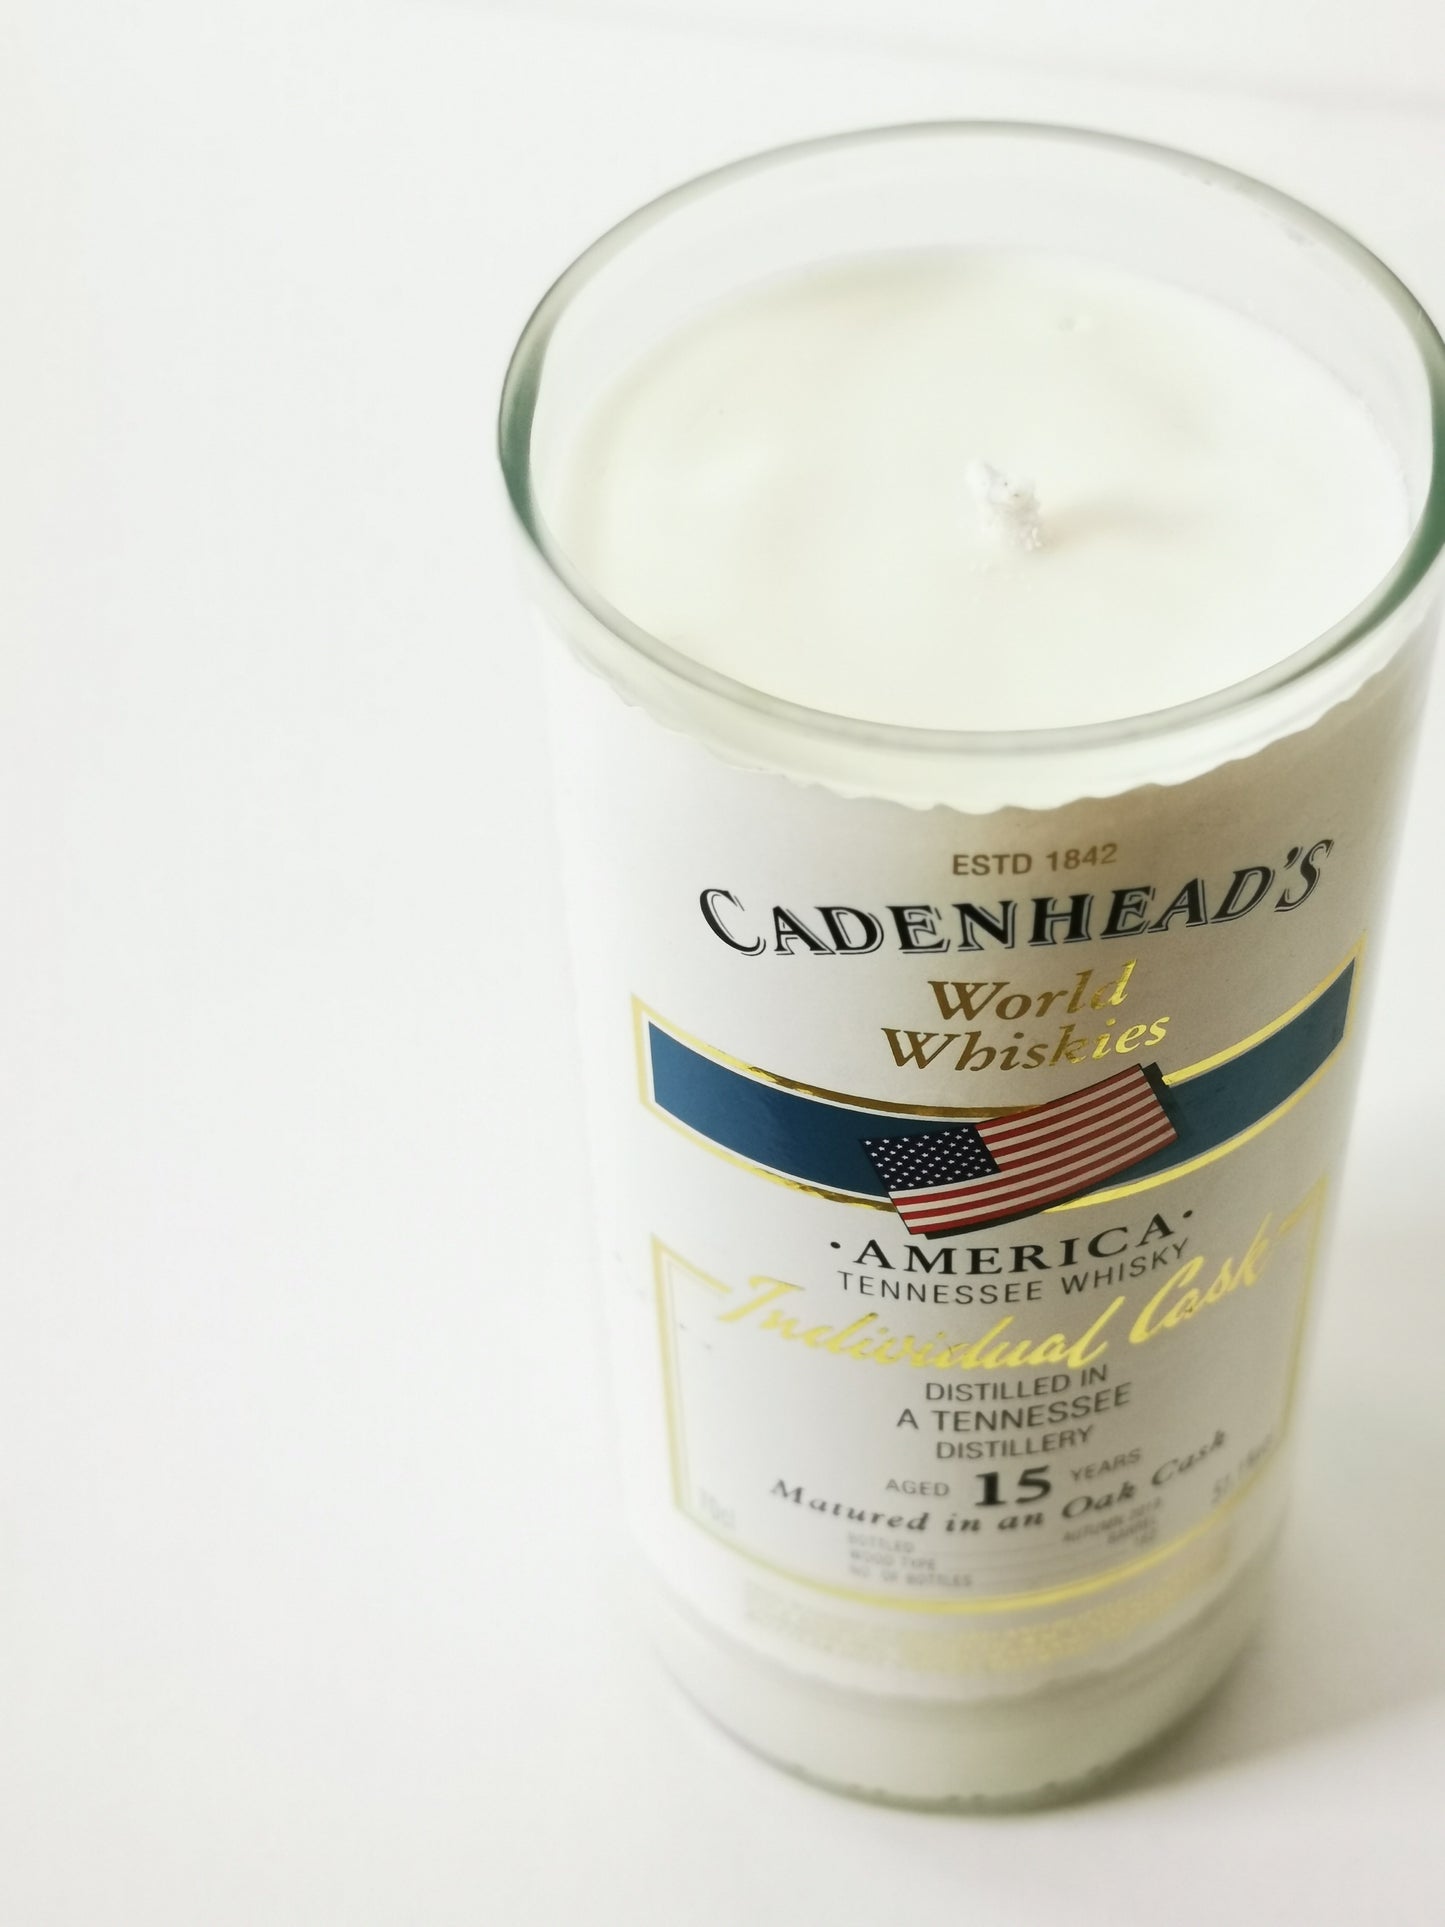 Eco Friendly-Cadenhead's - 15 Year Old Tennessee Whisky Bottle Candle-Whiskey Bottle Candles-Adhock Homeware